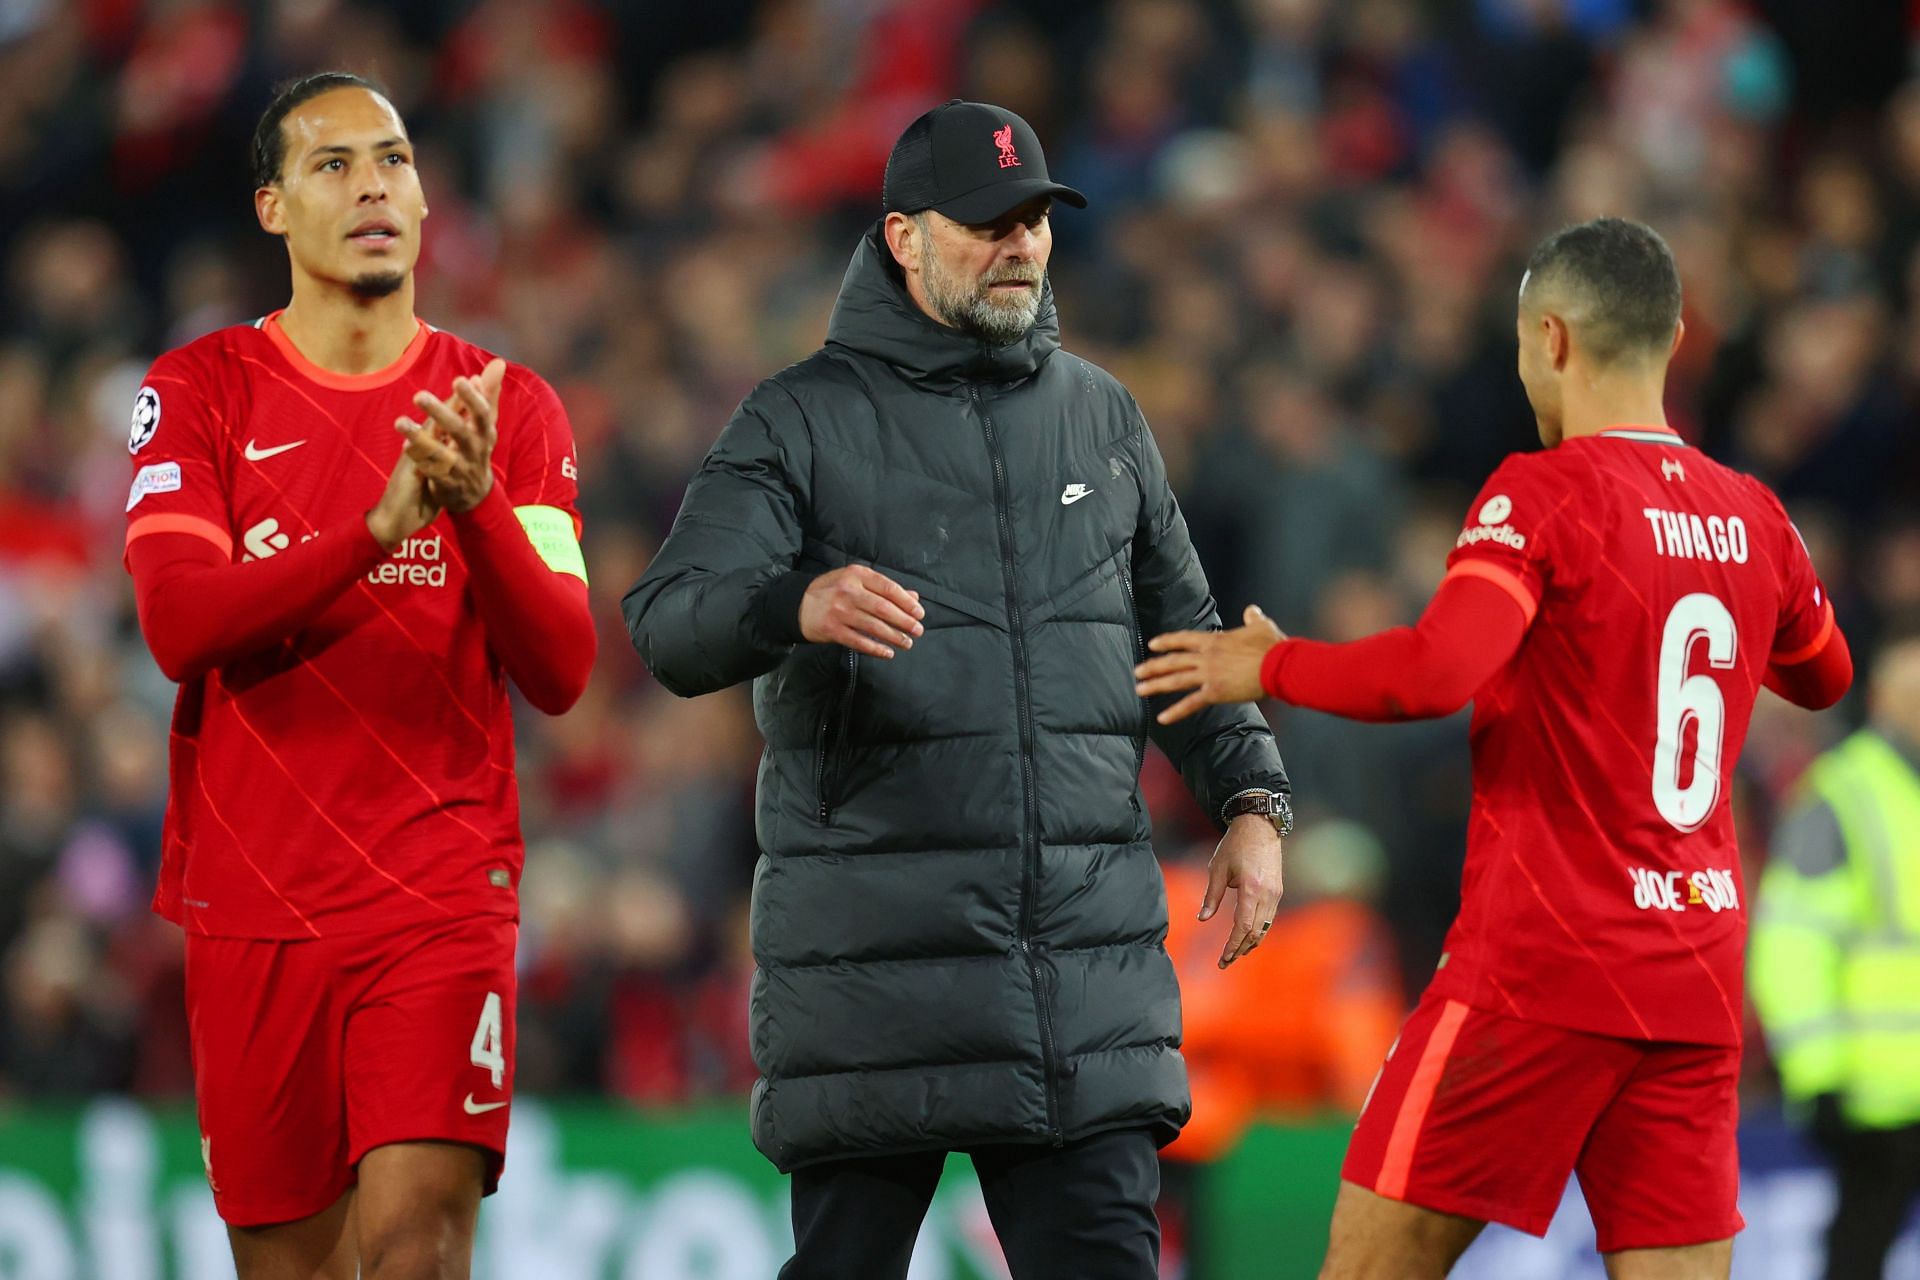 The Reds are aiming for a quadruple